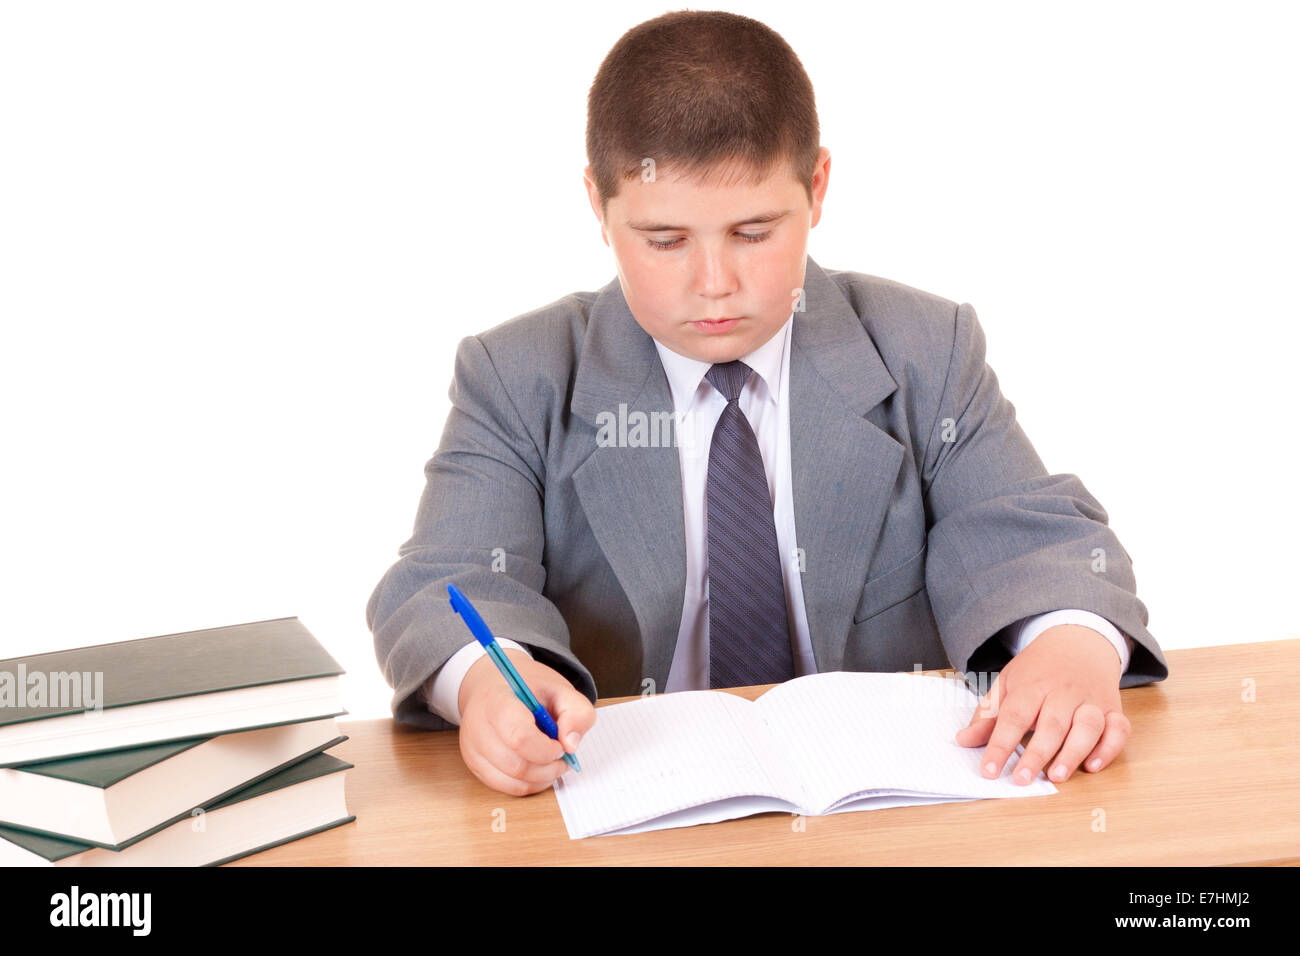 A child contemplates a homework assignment over white background Stock Photo